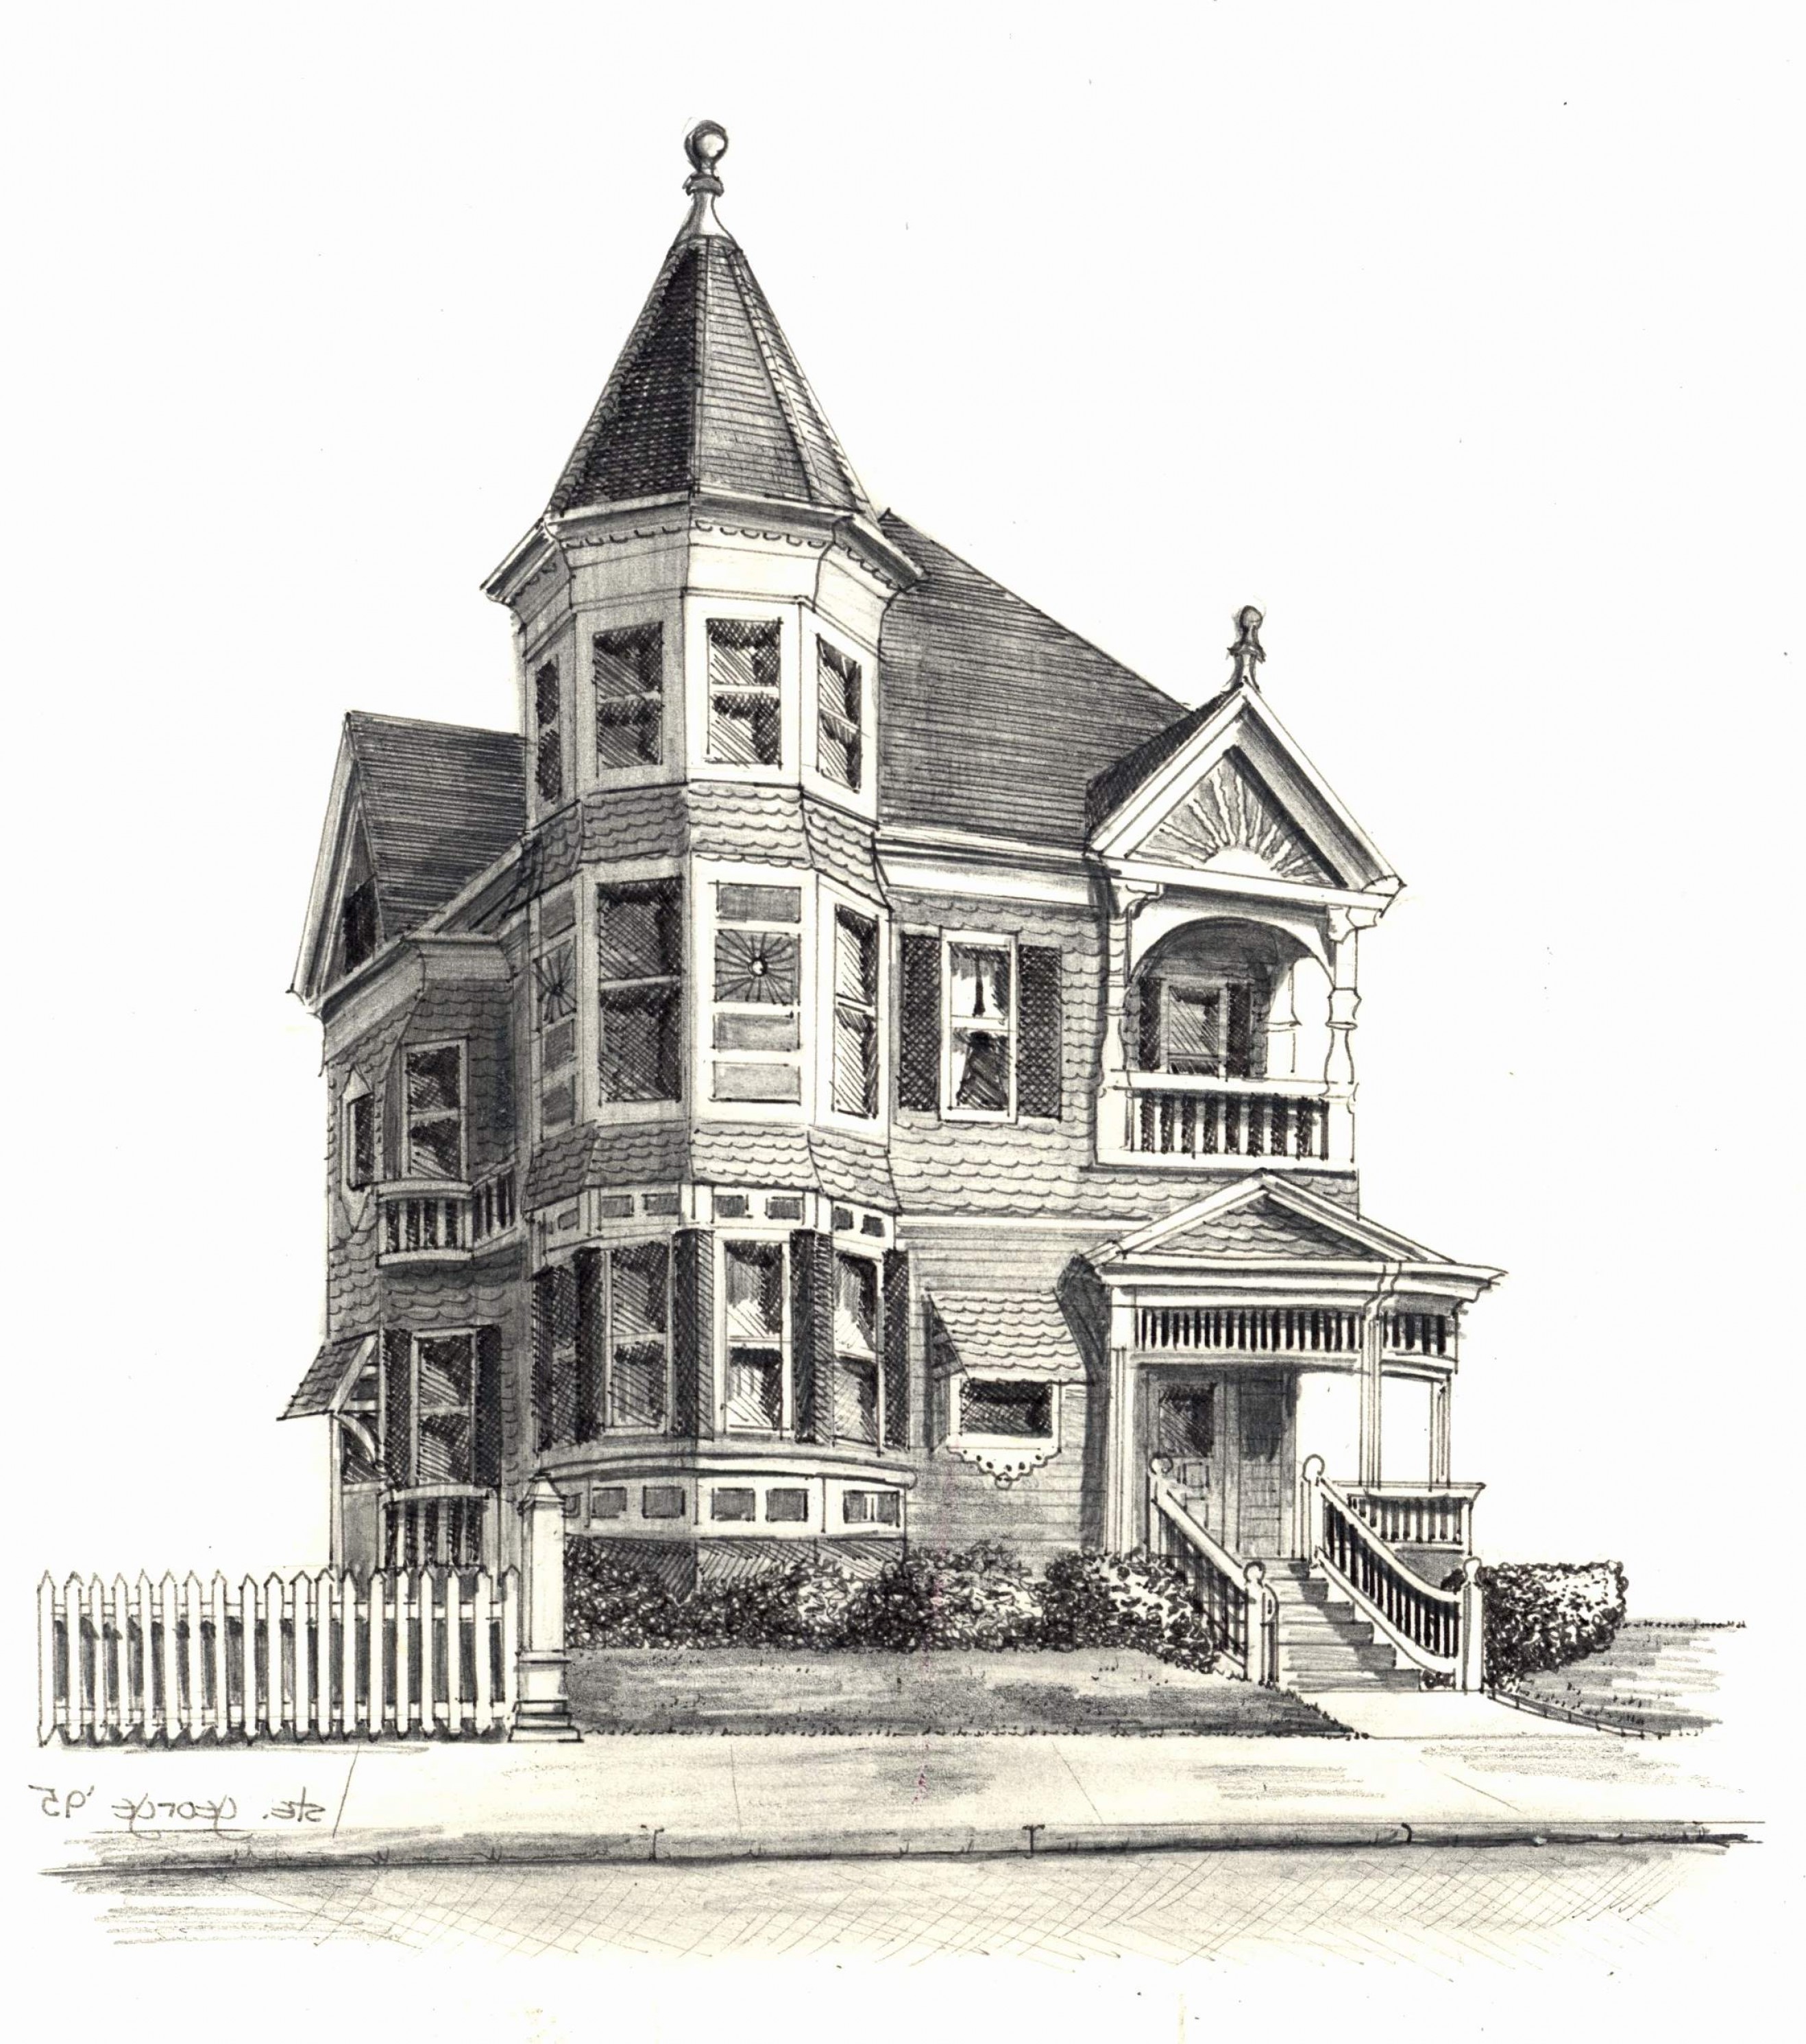 How To Draw A Victorian House Image to u